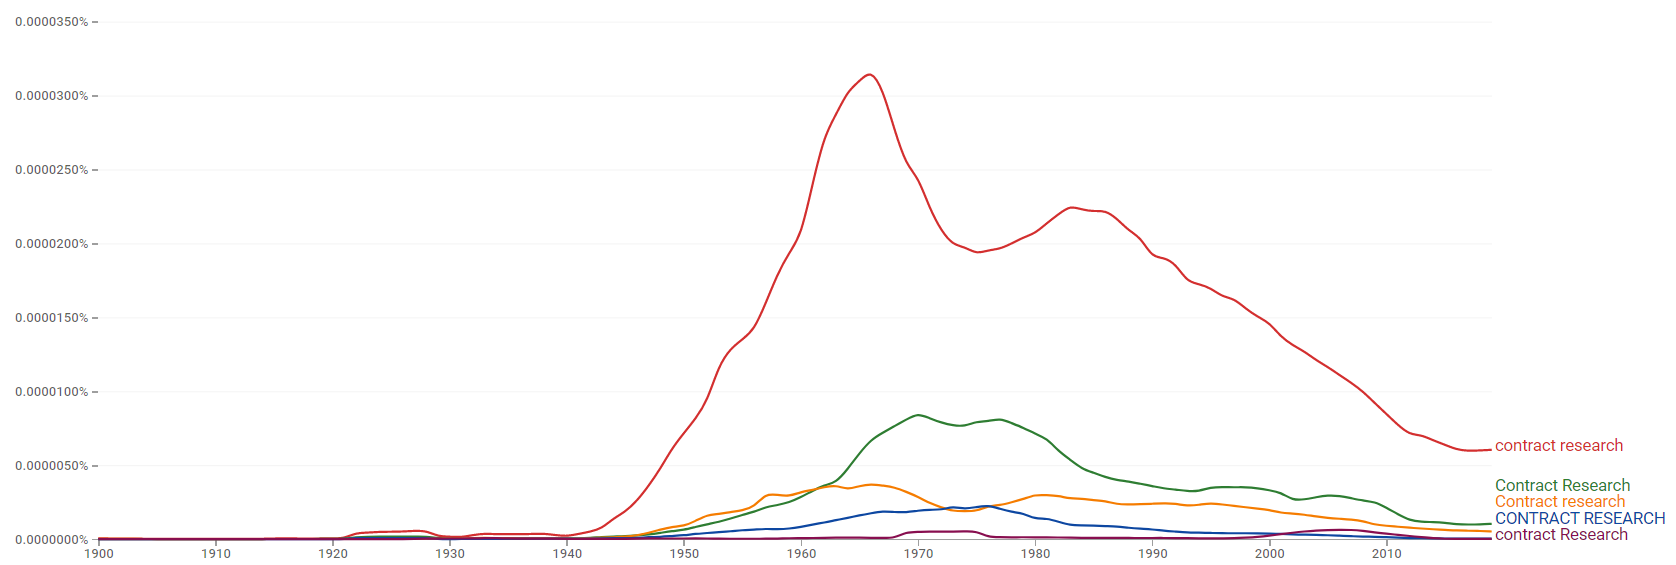 Contract research Ngram.PNG